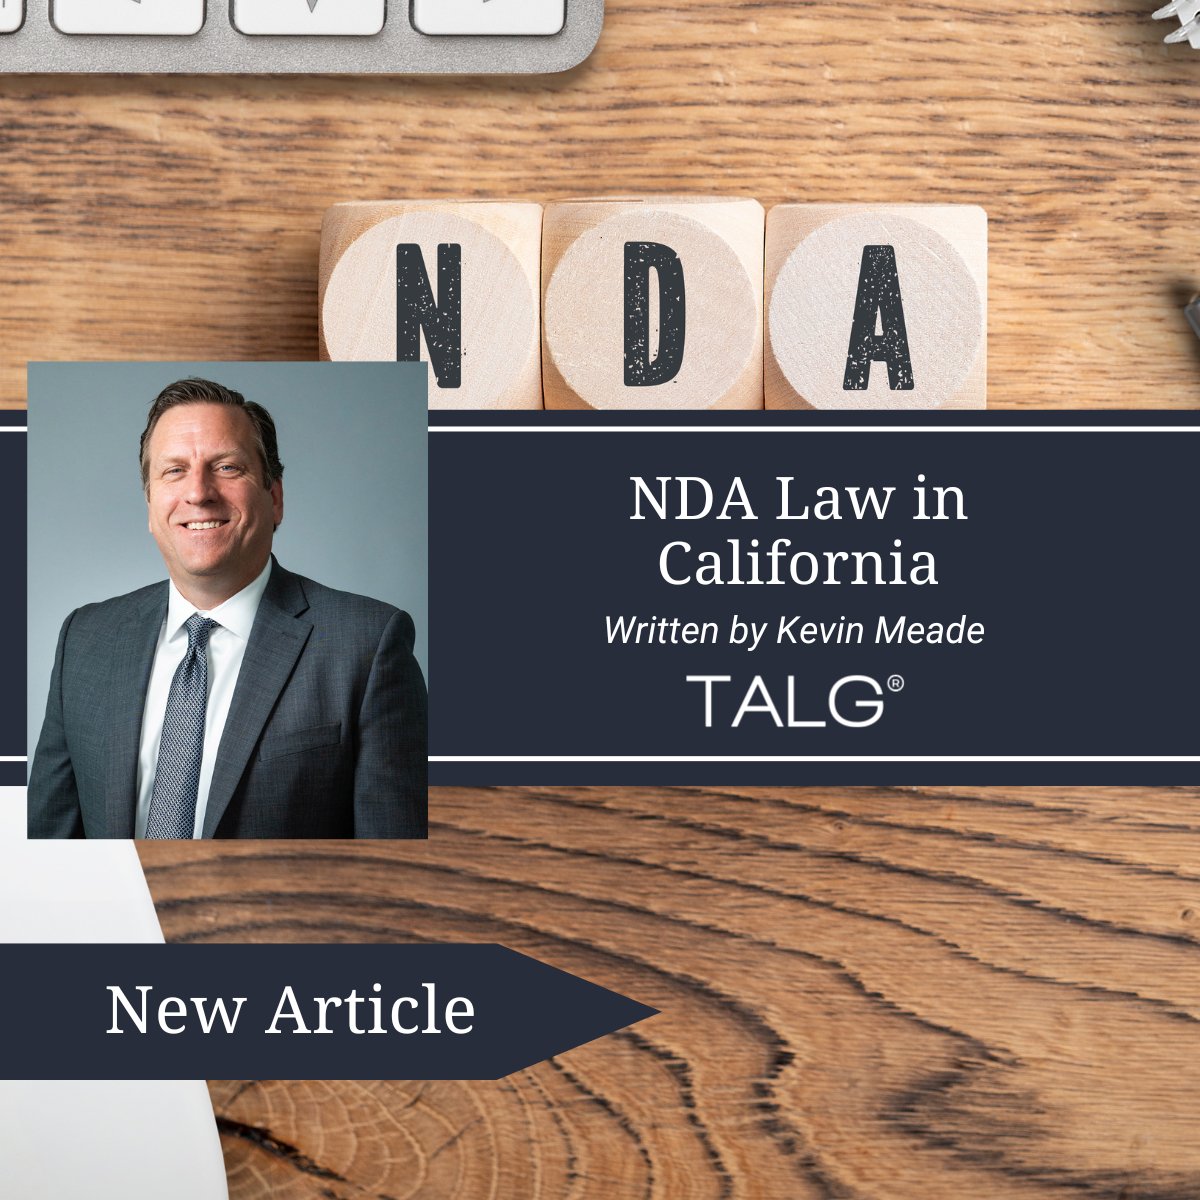 This article by Kevin Meade discusses the laws surrounding NDAs in California: bit.ly/3LgqjQT

Our team of attorneys regularly assists clients with these issues, so if you have concerns about an NDA please contact us today.

#NDA #NonDisclosureAgreement #CaliforniaLaw